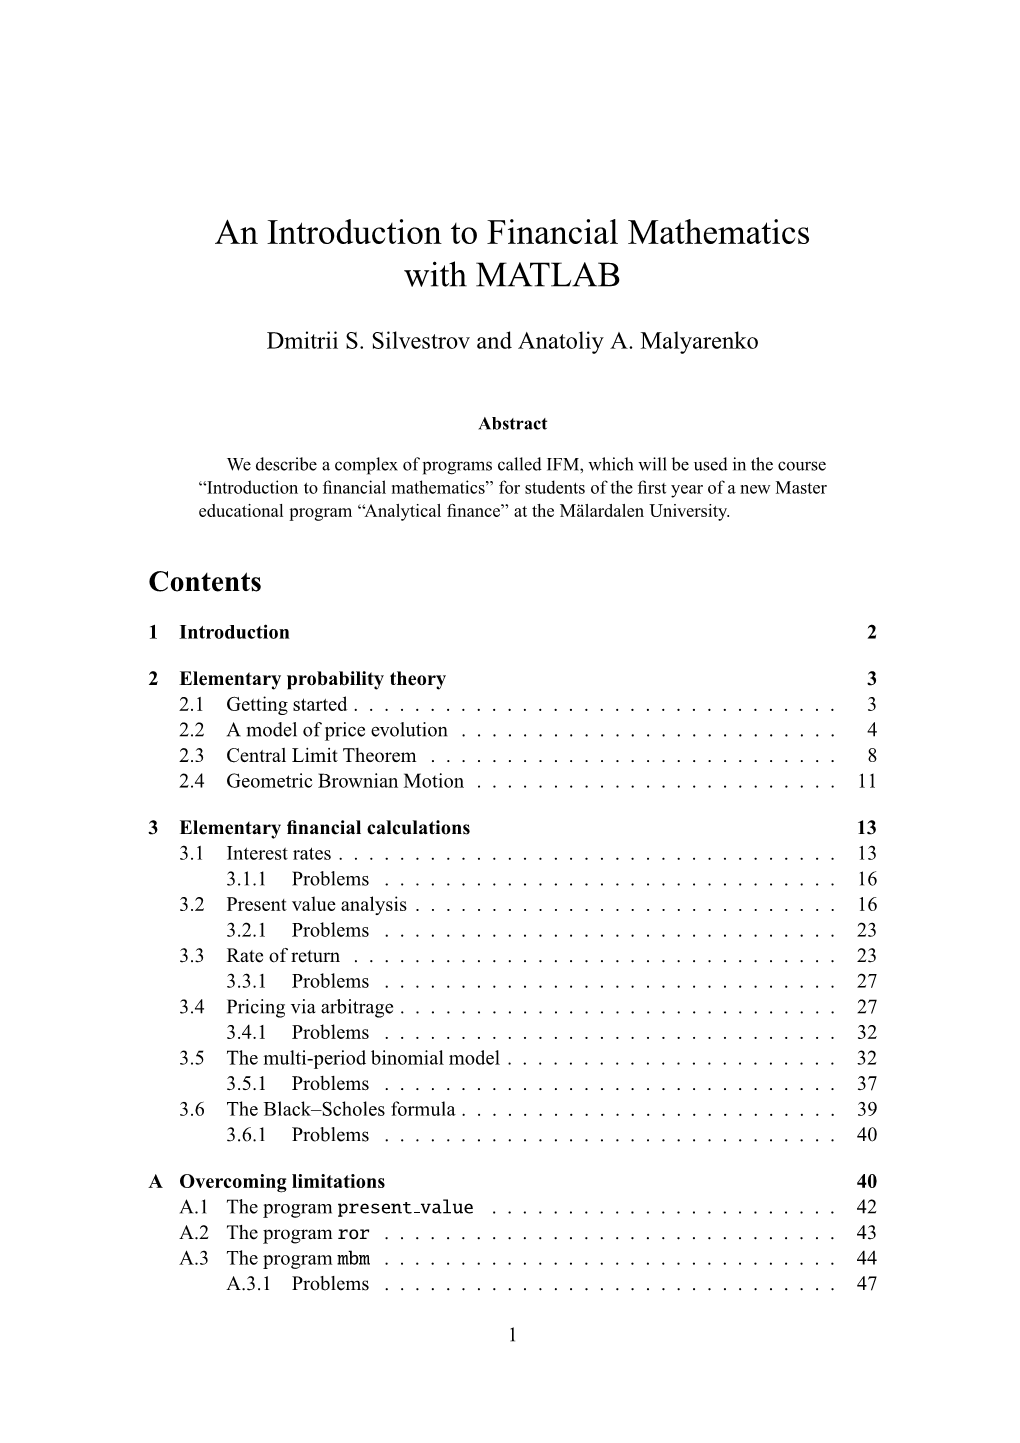 An Introduction to Financial Mathematics with MATLAB